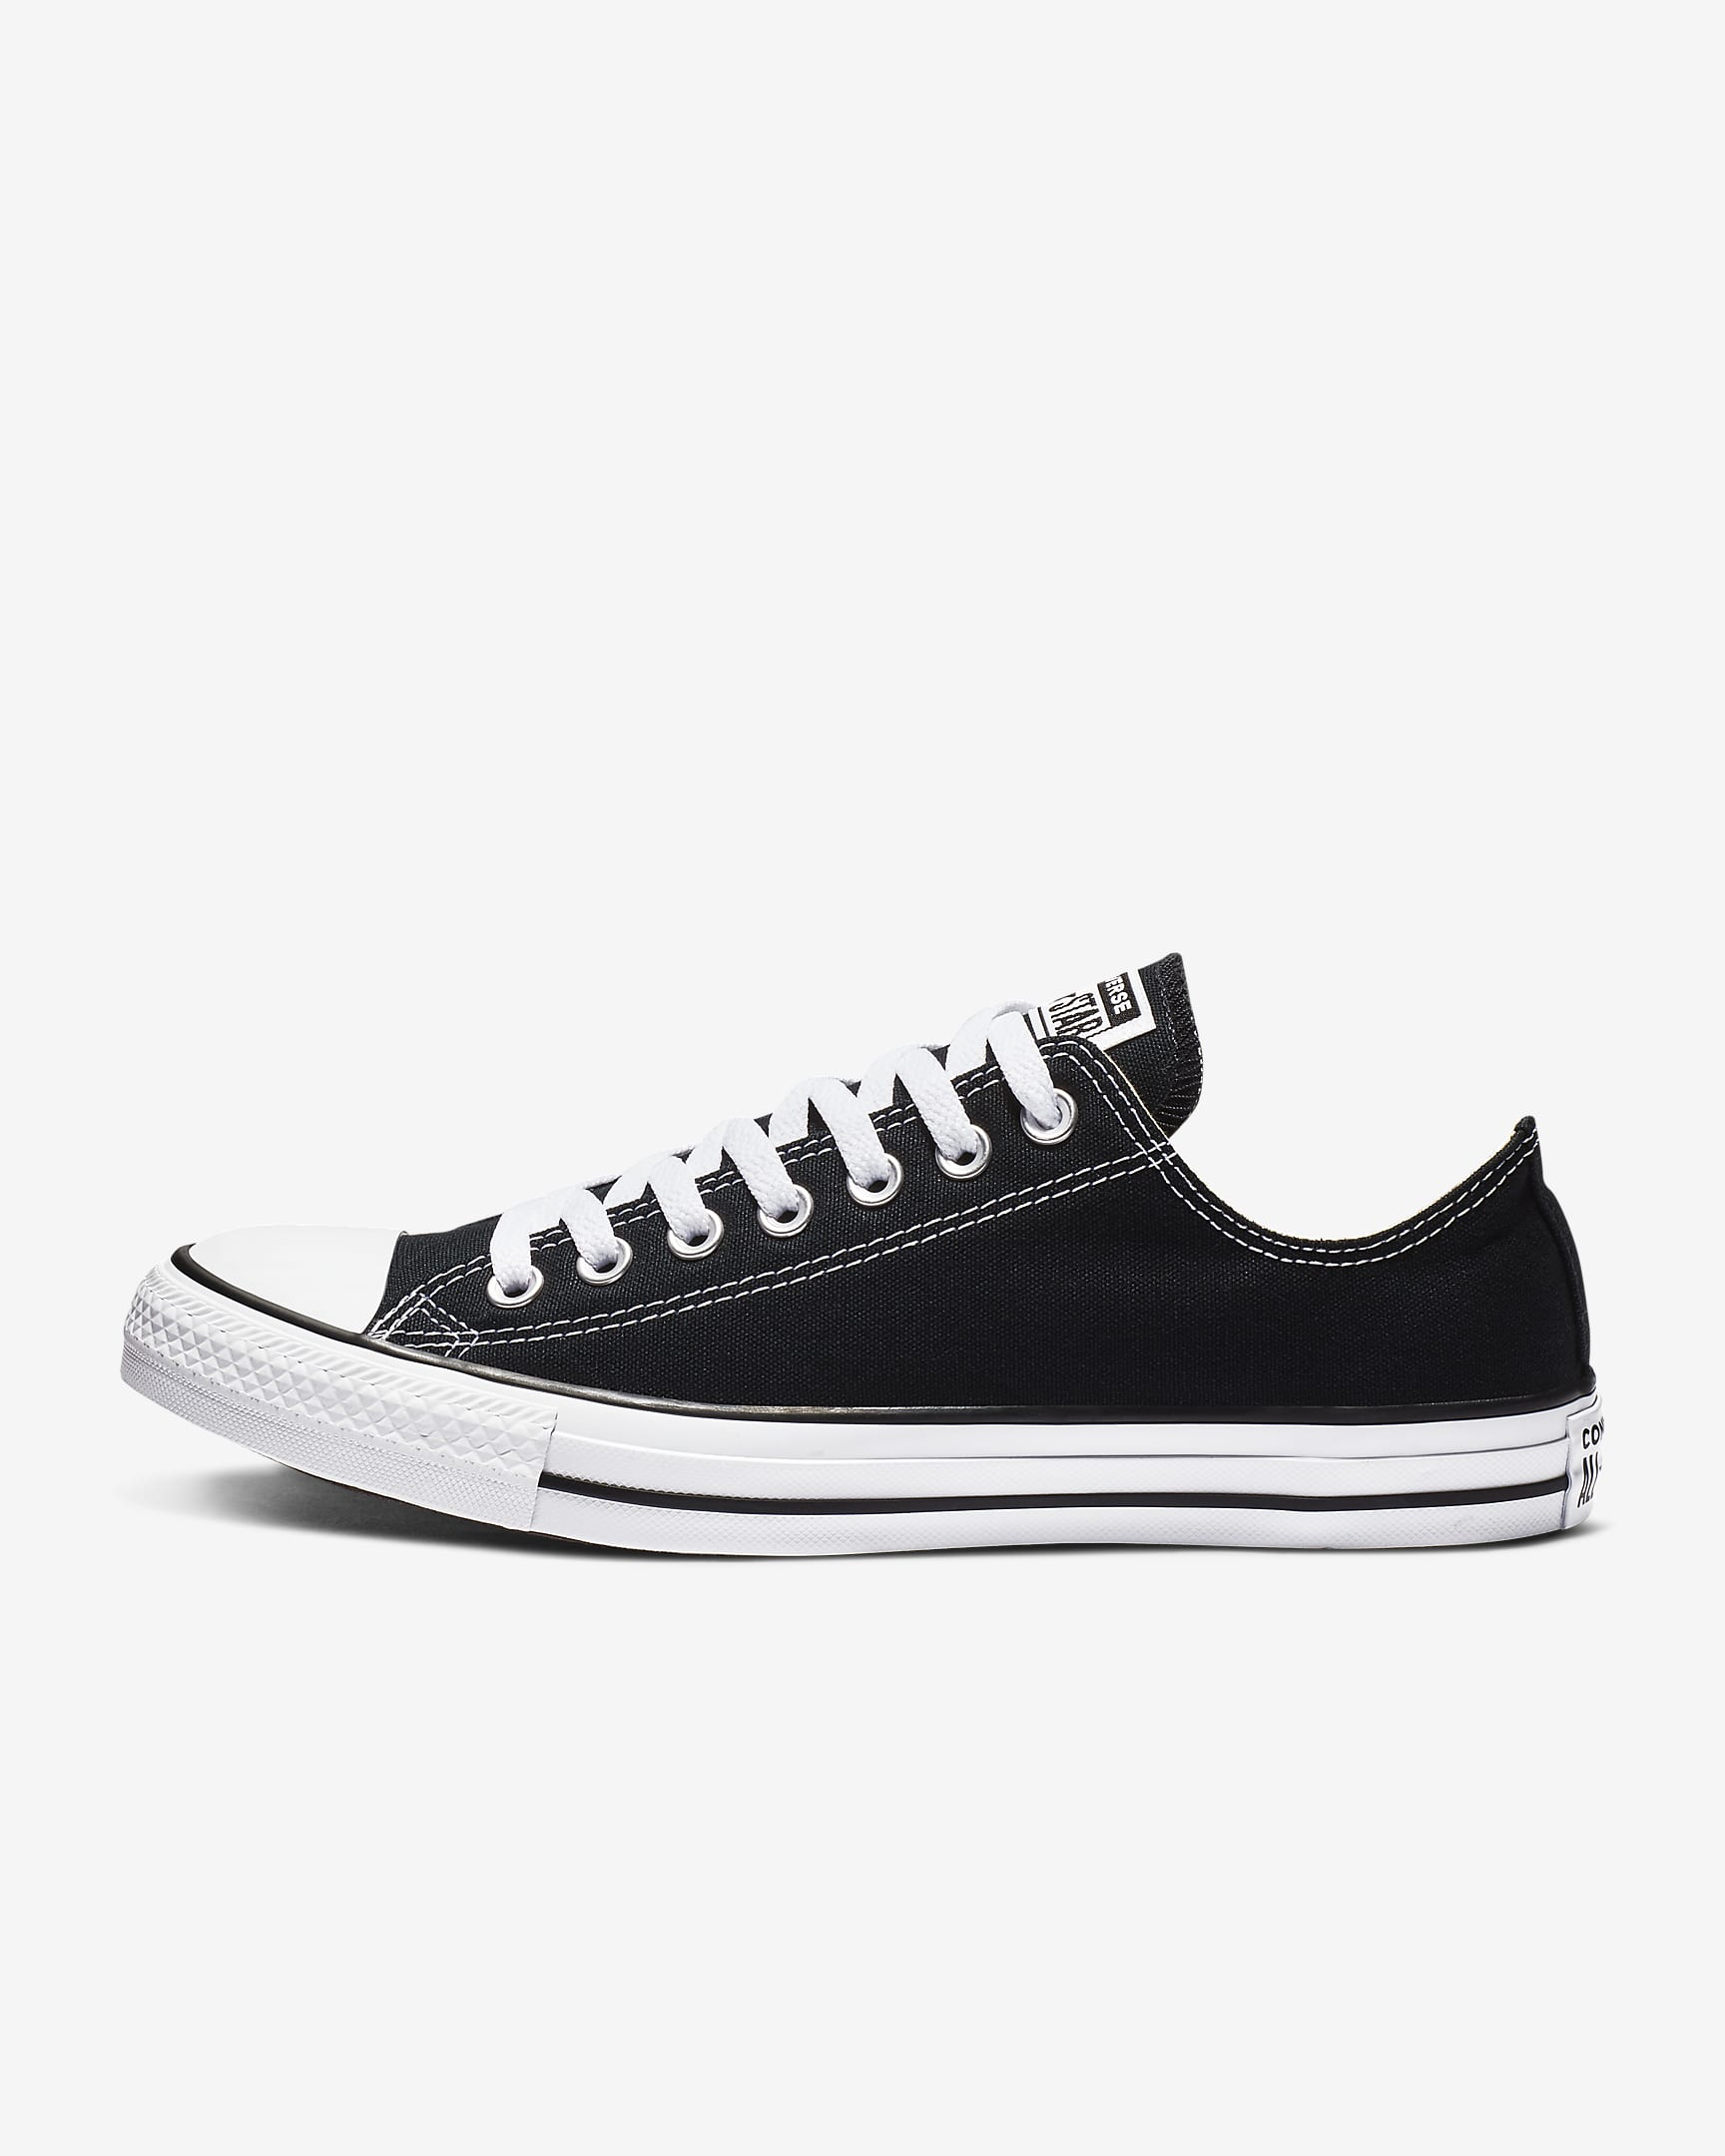 Converse Chuck Taylor All Star Low Top Unisex Shoes. Nike.com